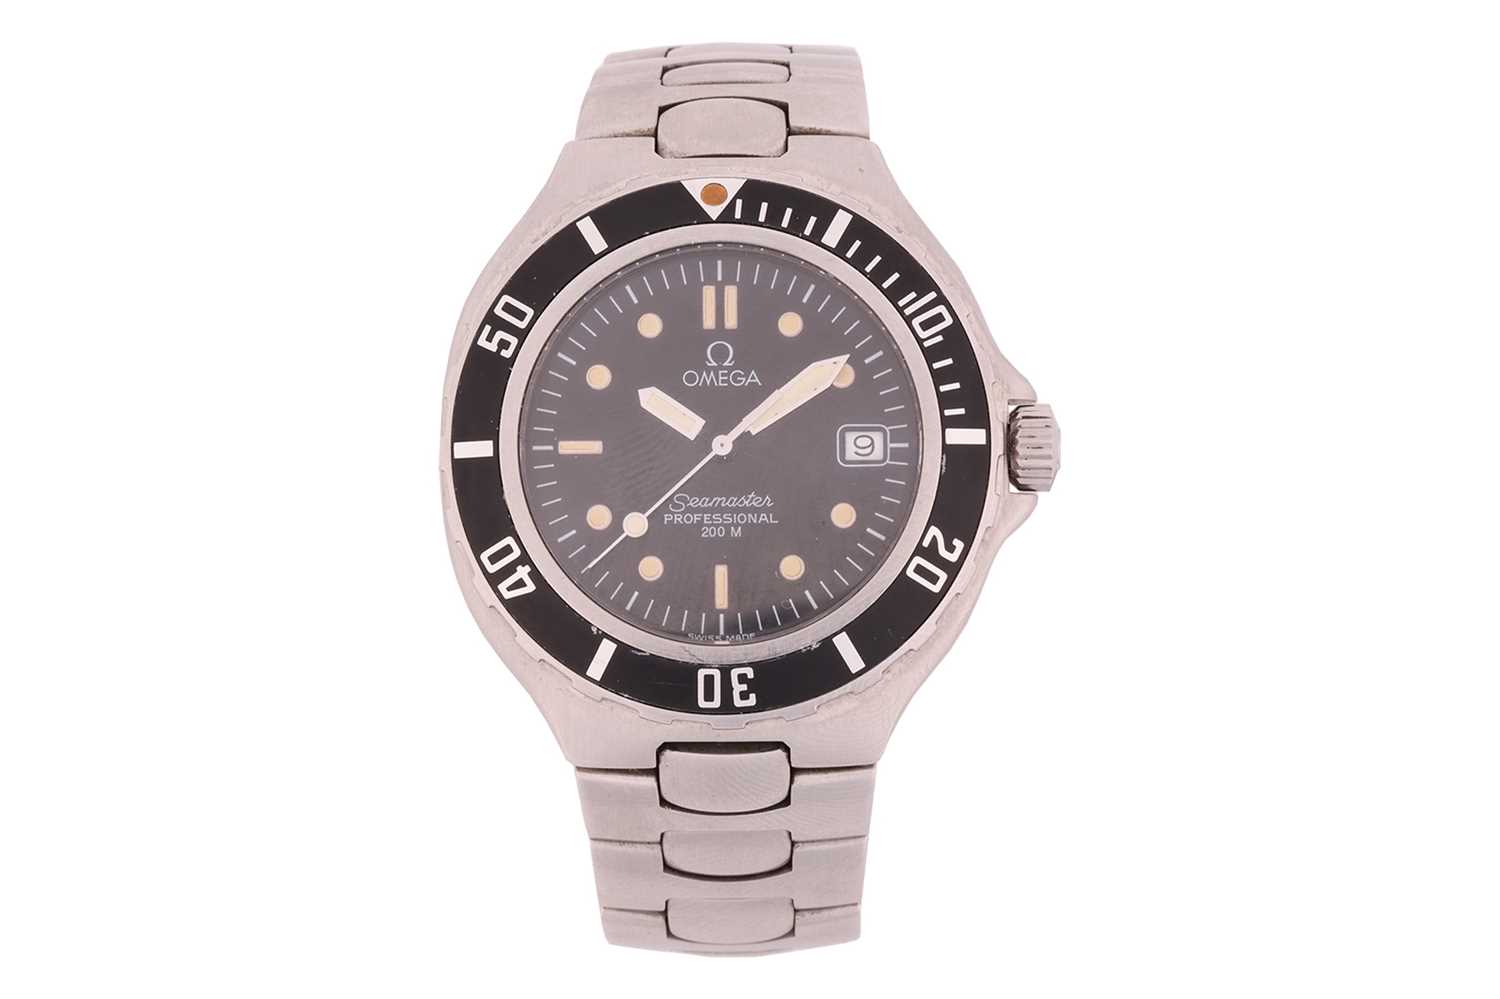 An Omega Seamaster professional 200m diving watch in steel. Model: 396.1052 Serial: 53011249 Year: 1